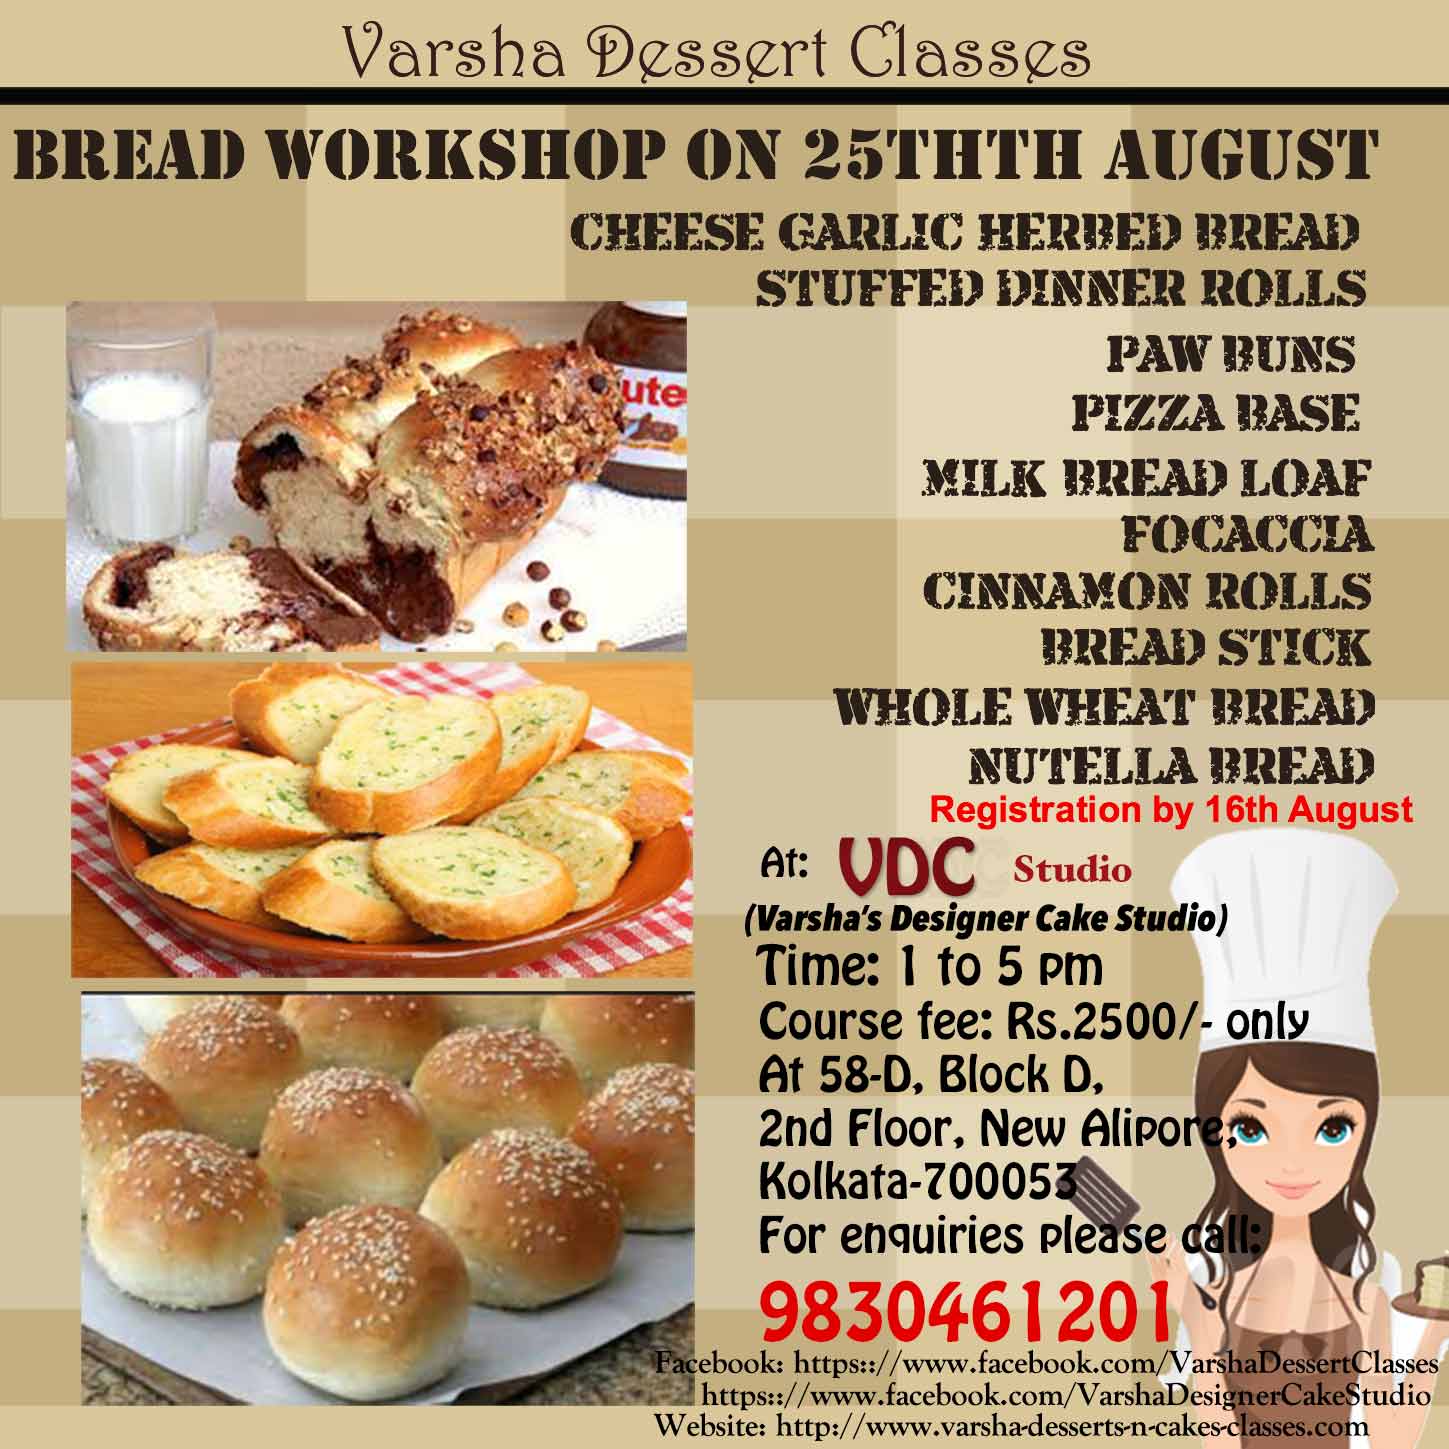 BREAD WORKSHOP ON 25TH AUGUST